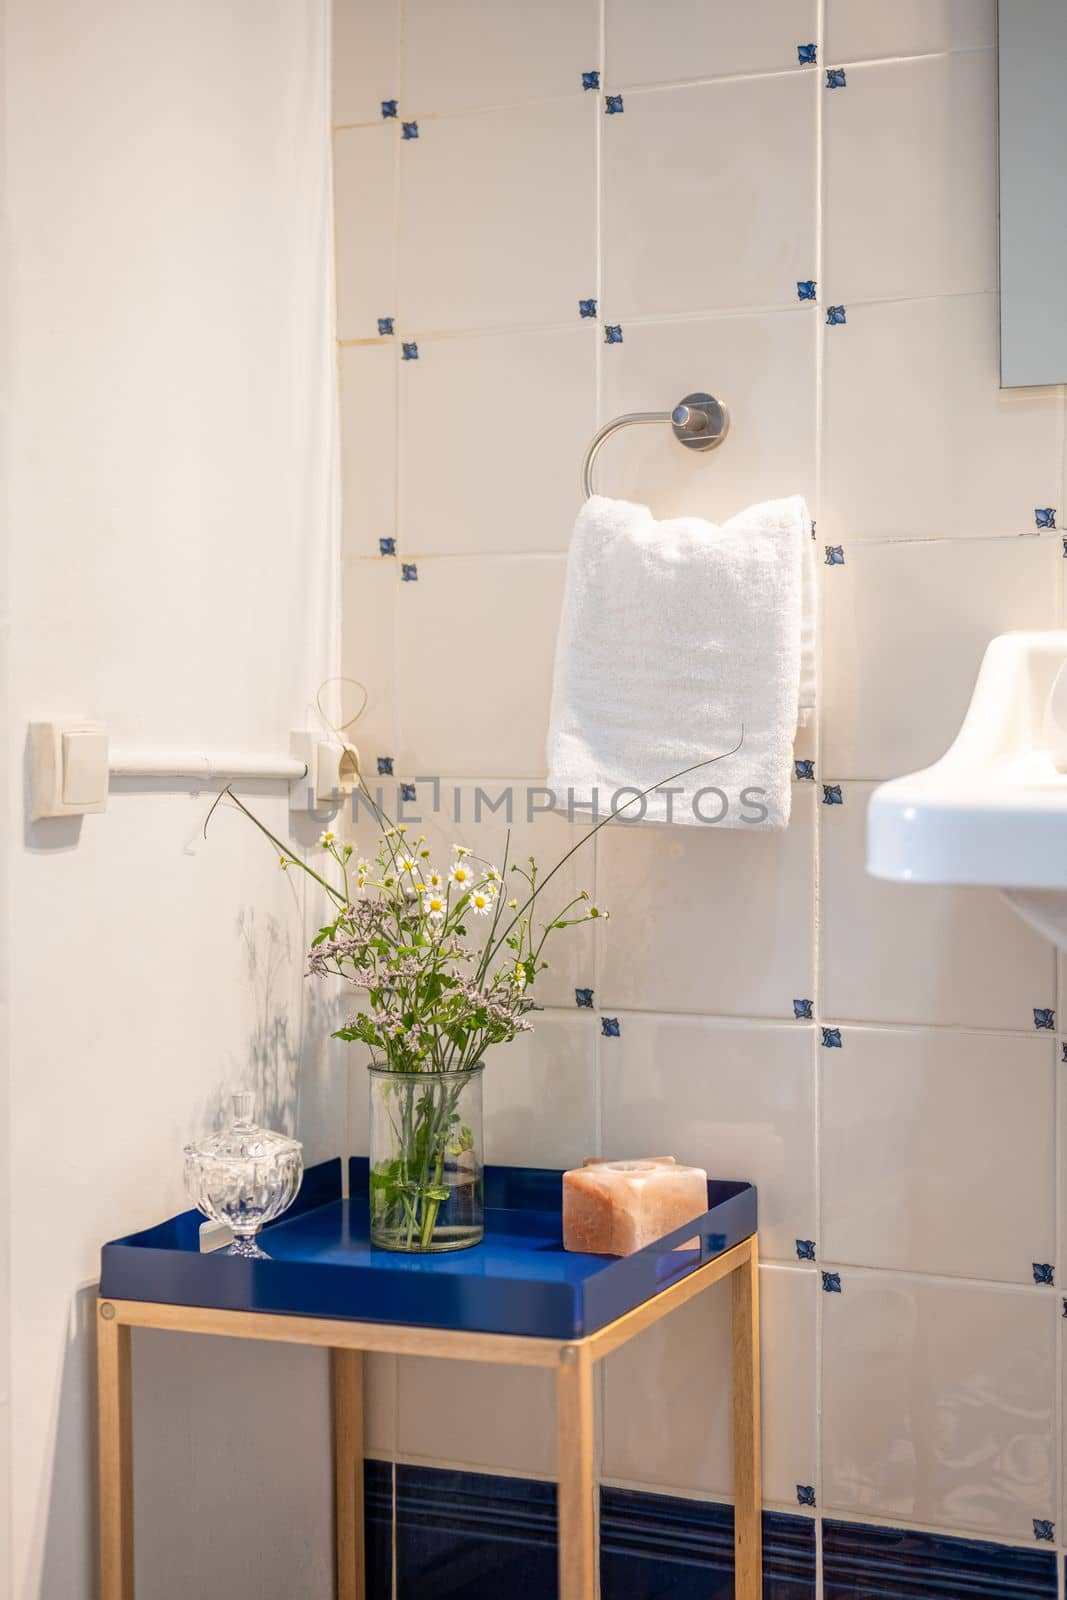 Corner of a bathroom with a decorative low decorative table with a blue base. On the table is a vase with wild flowers. On a tiled wall is a holder with a white terry towel